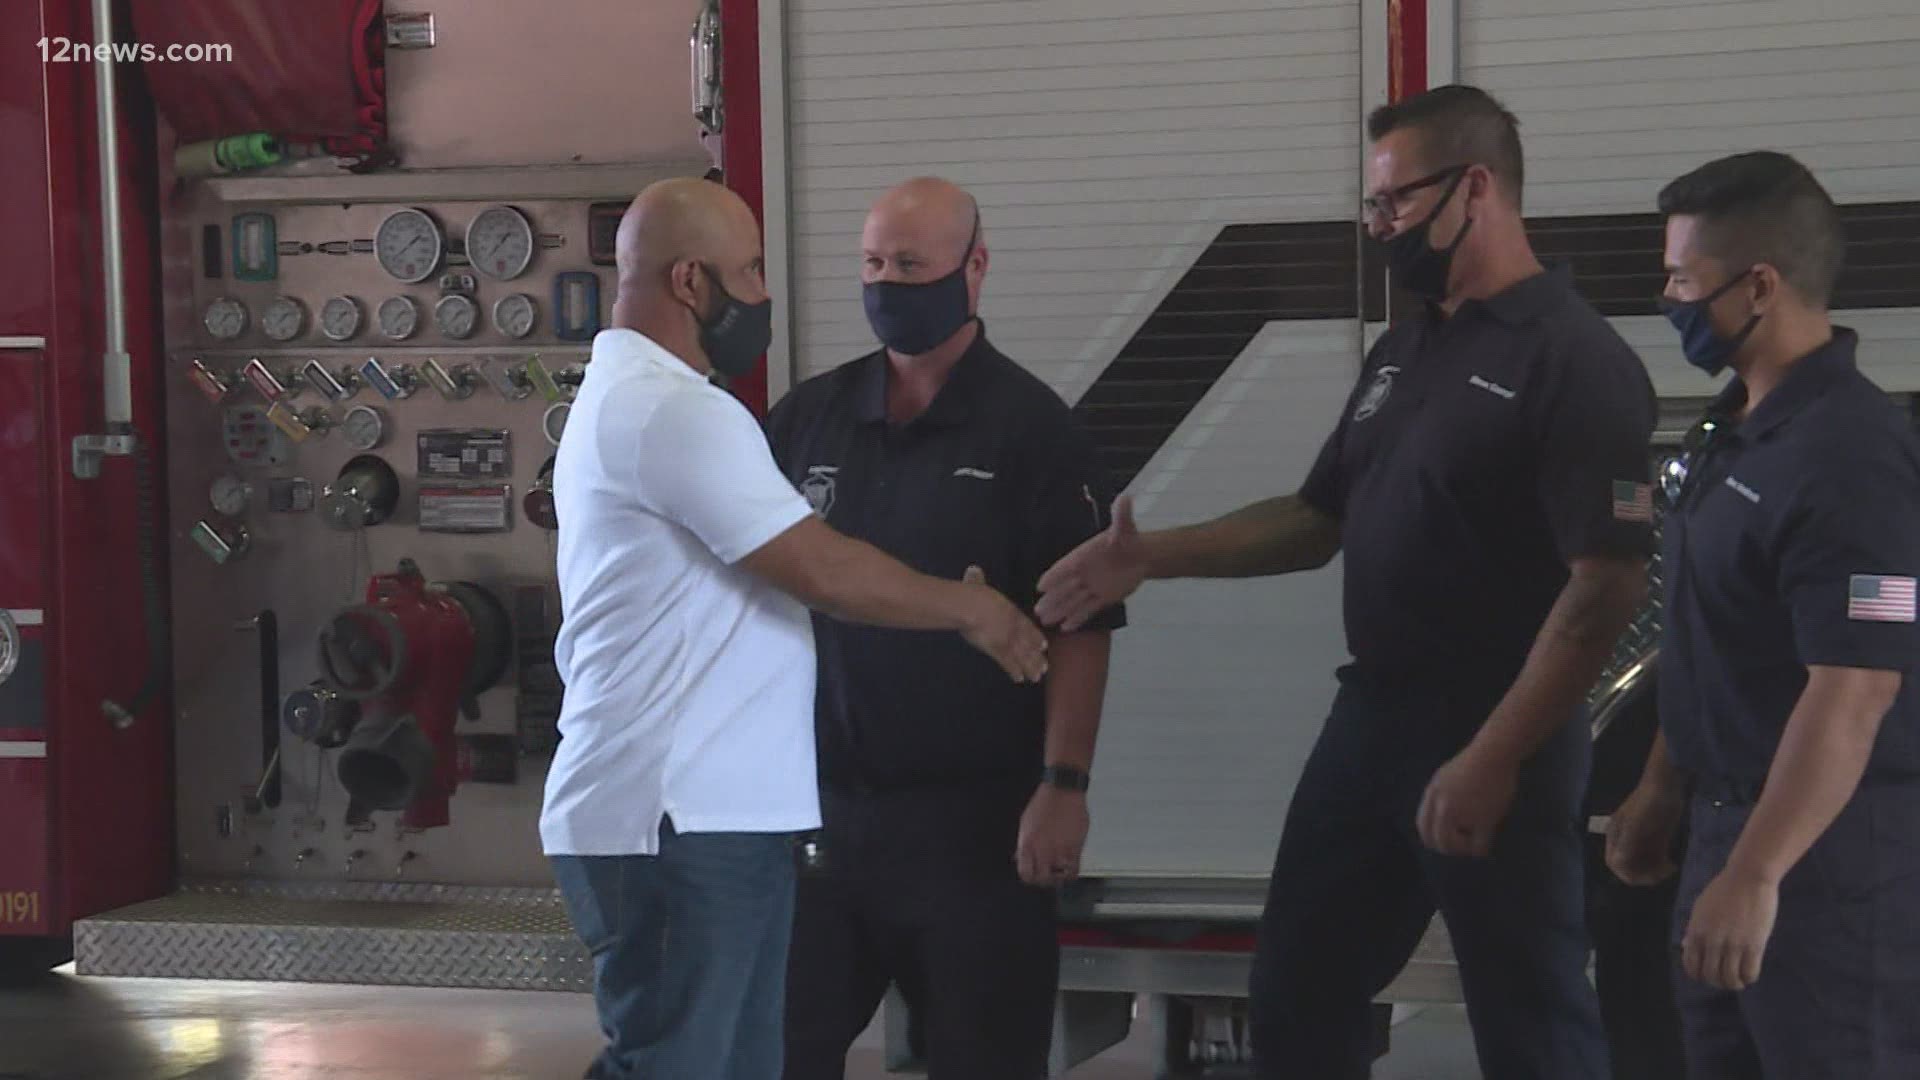 A Buckeye man suffered a major heart attack and survived, thanks to some dedicated first responders. Today, he got to meet the men who saved him.